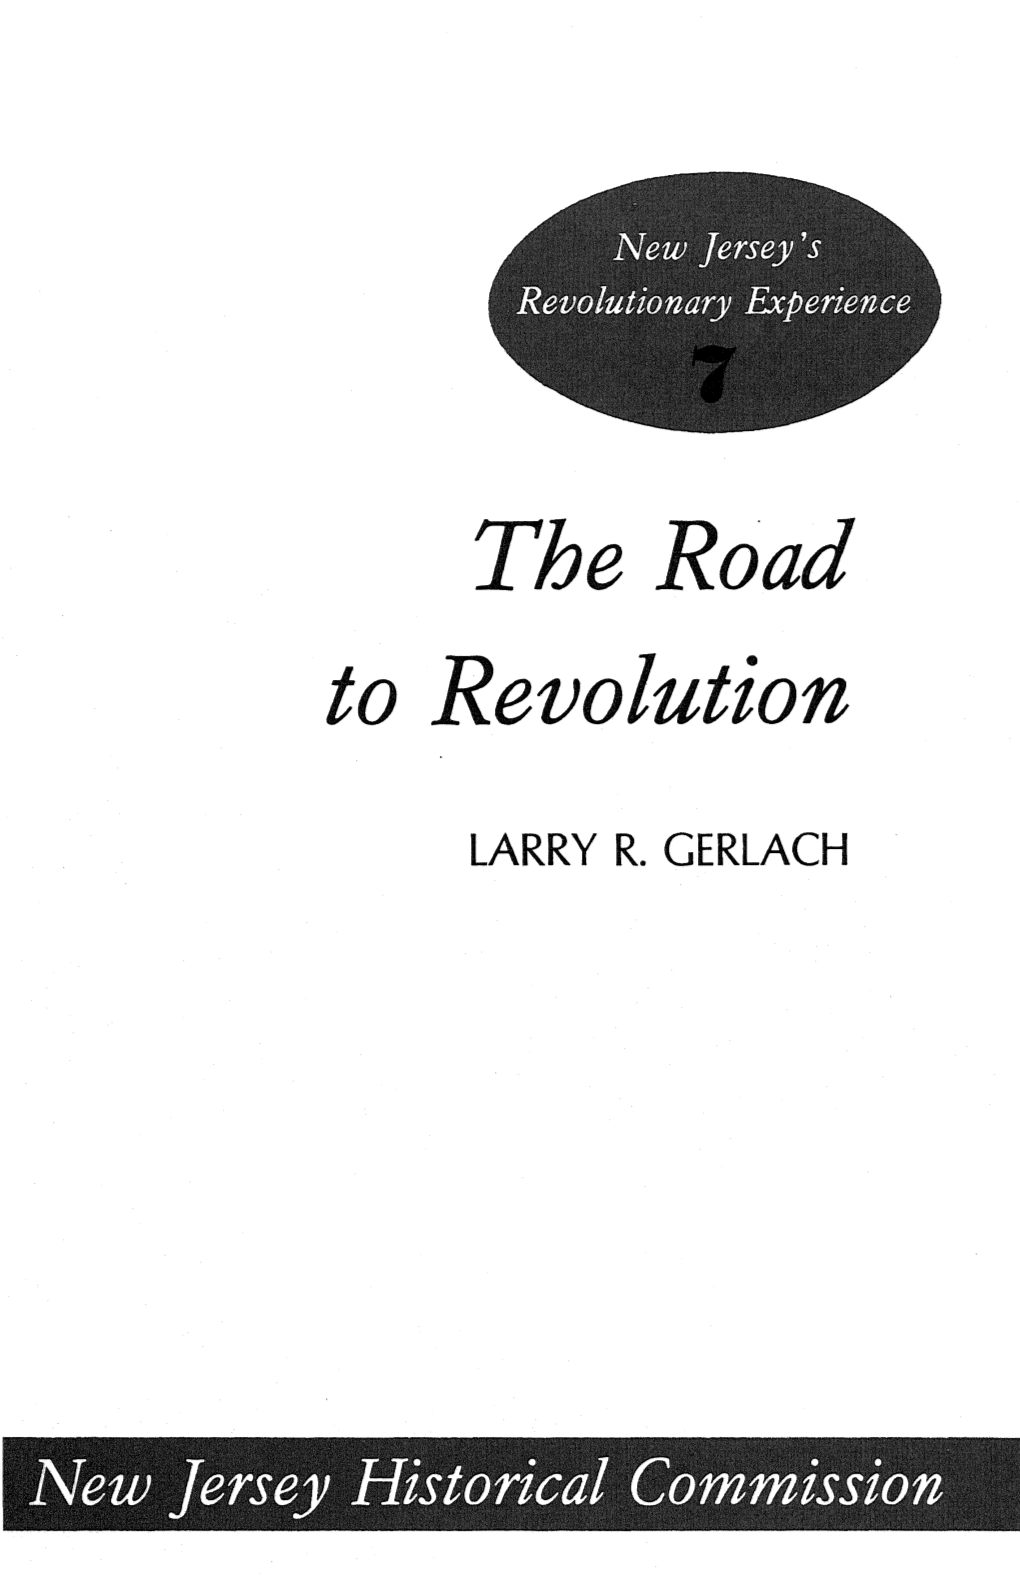 The Road to Revolution LARRY R. GERLACH